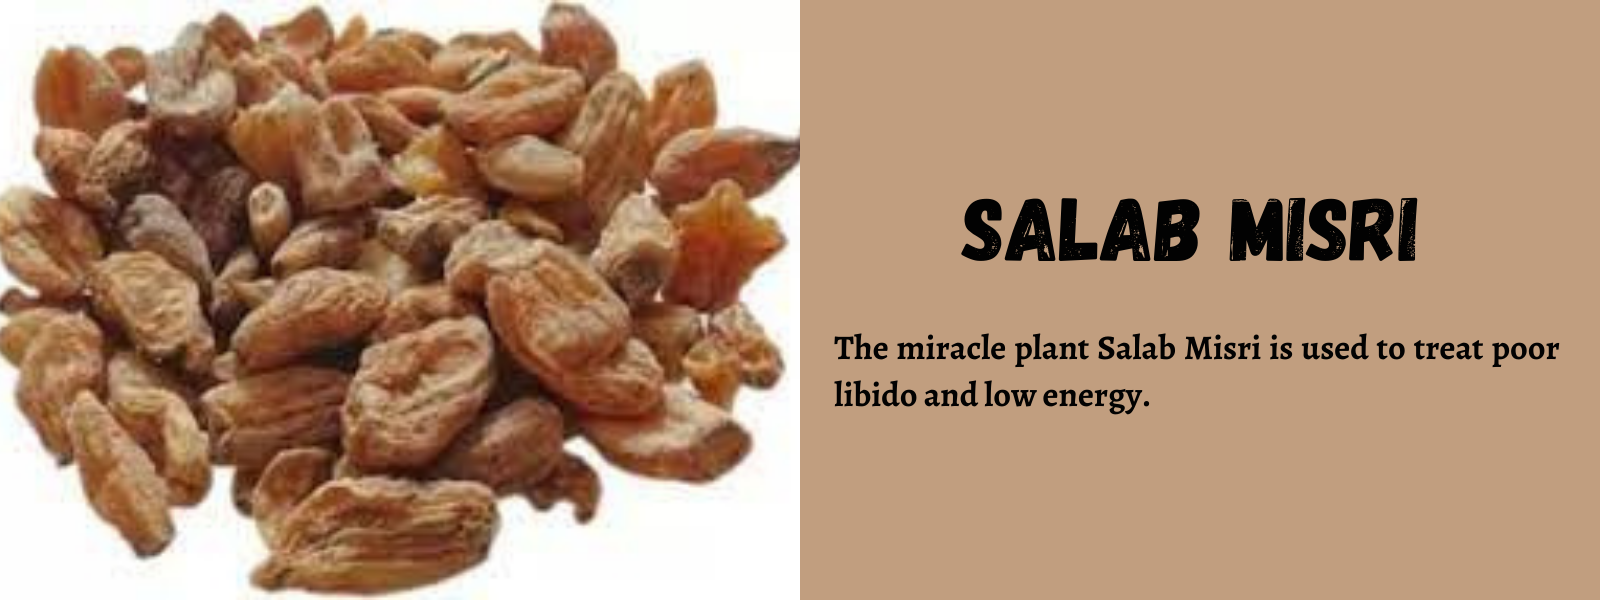 Salab Misri- Health Benefits, Uses and Important Facts